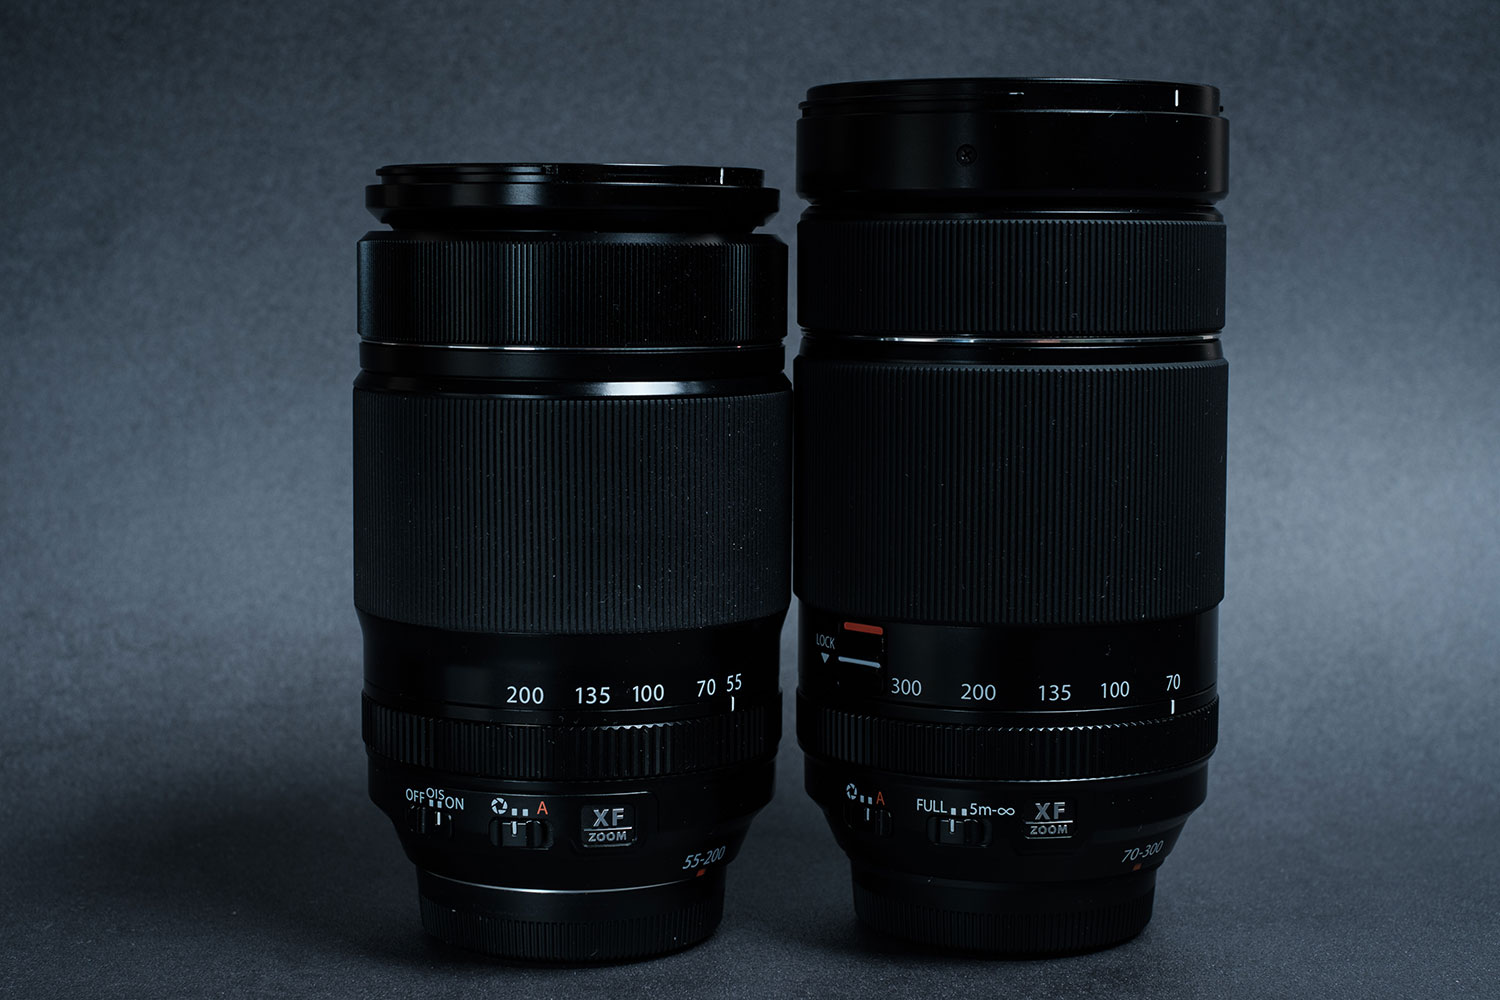 XF 70-300mm f/4-5.6R LM OIS WR - The Newcomer - Fuji X Passion